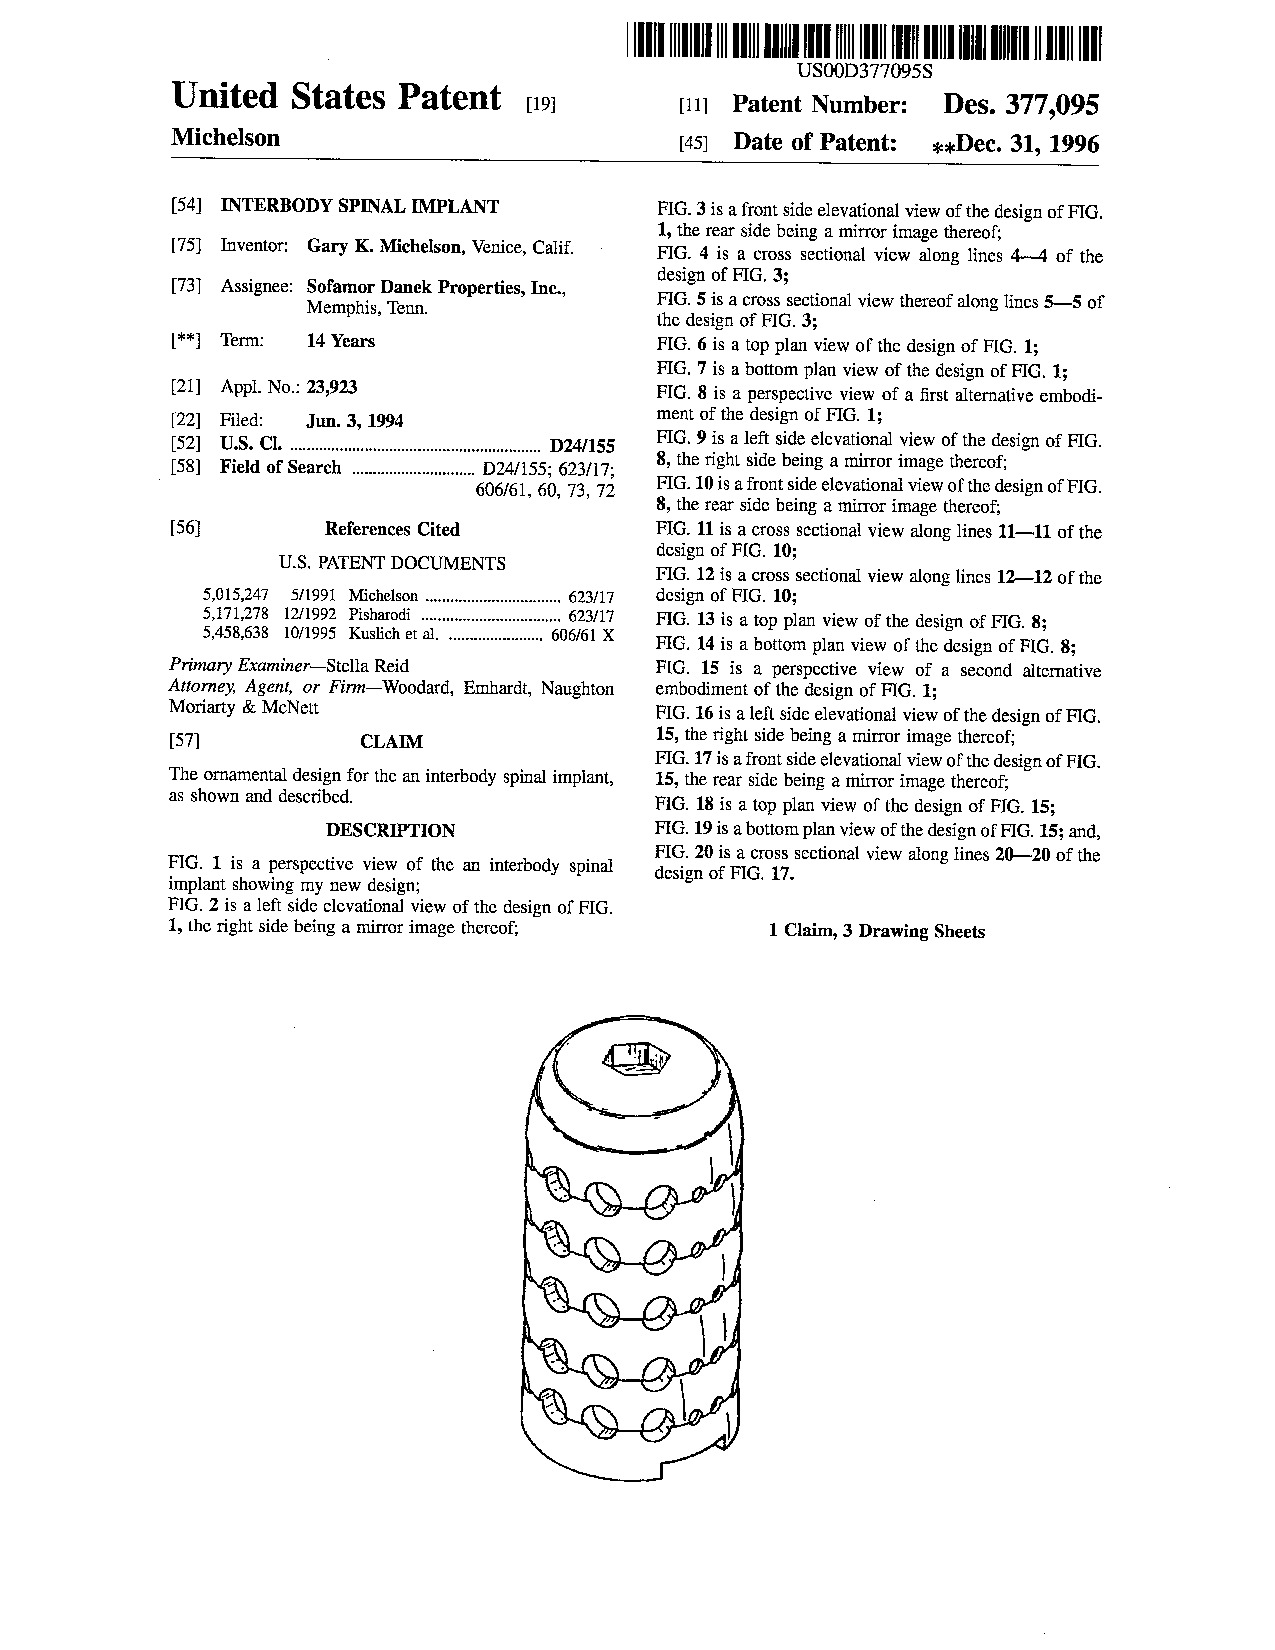 Interbody spinal implant - Patent D377,095